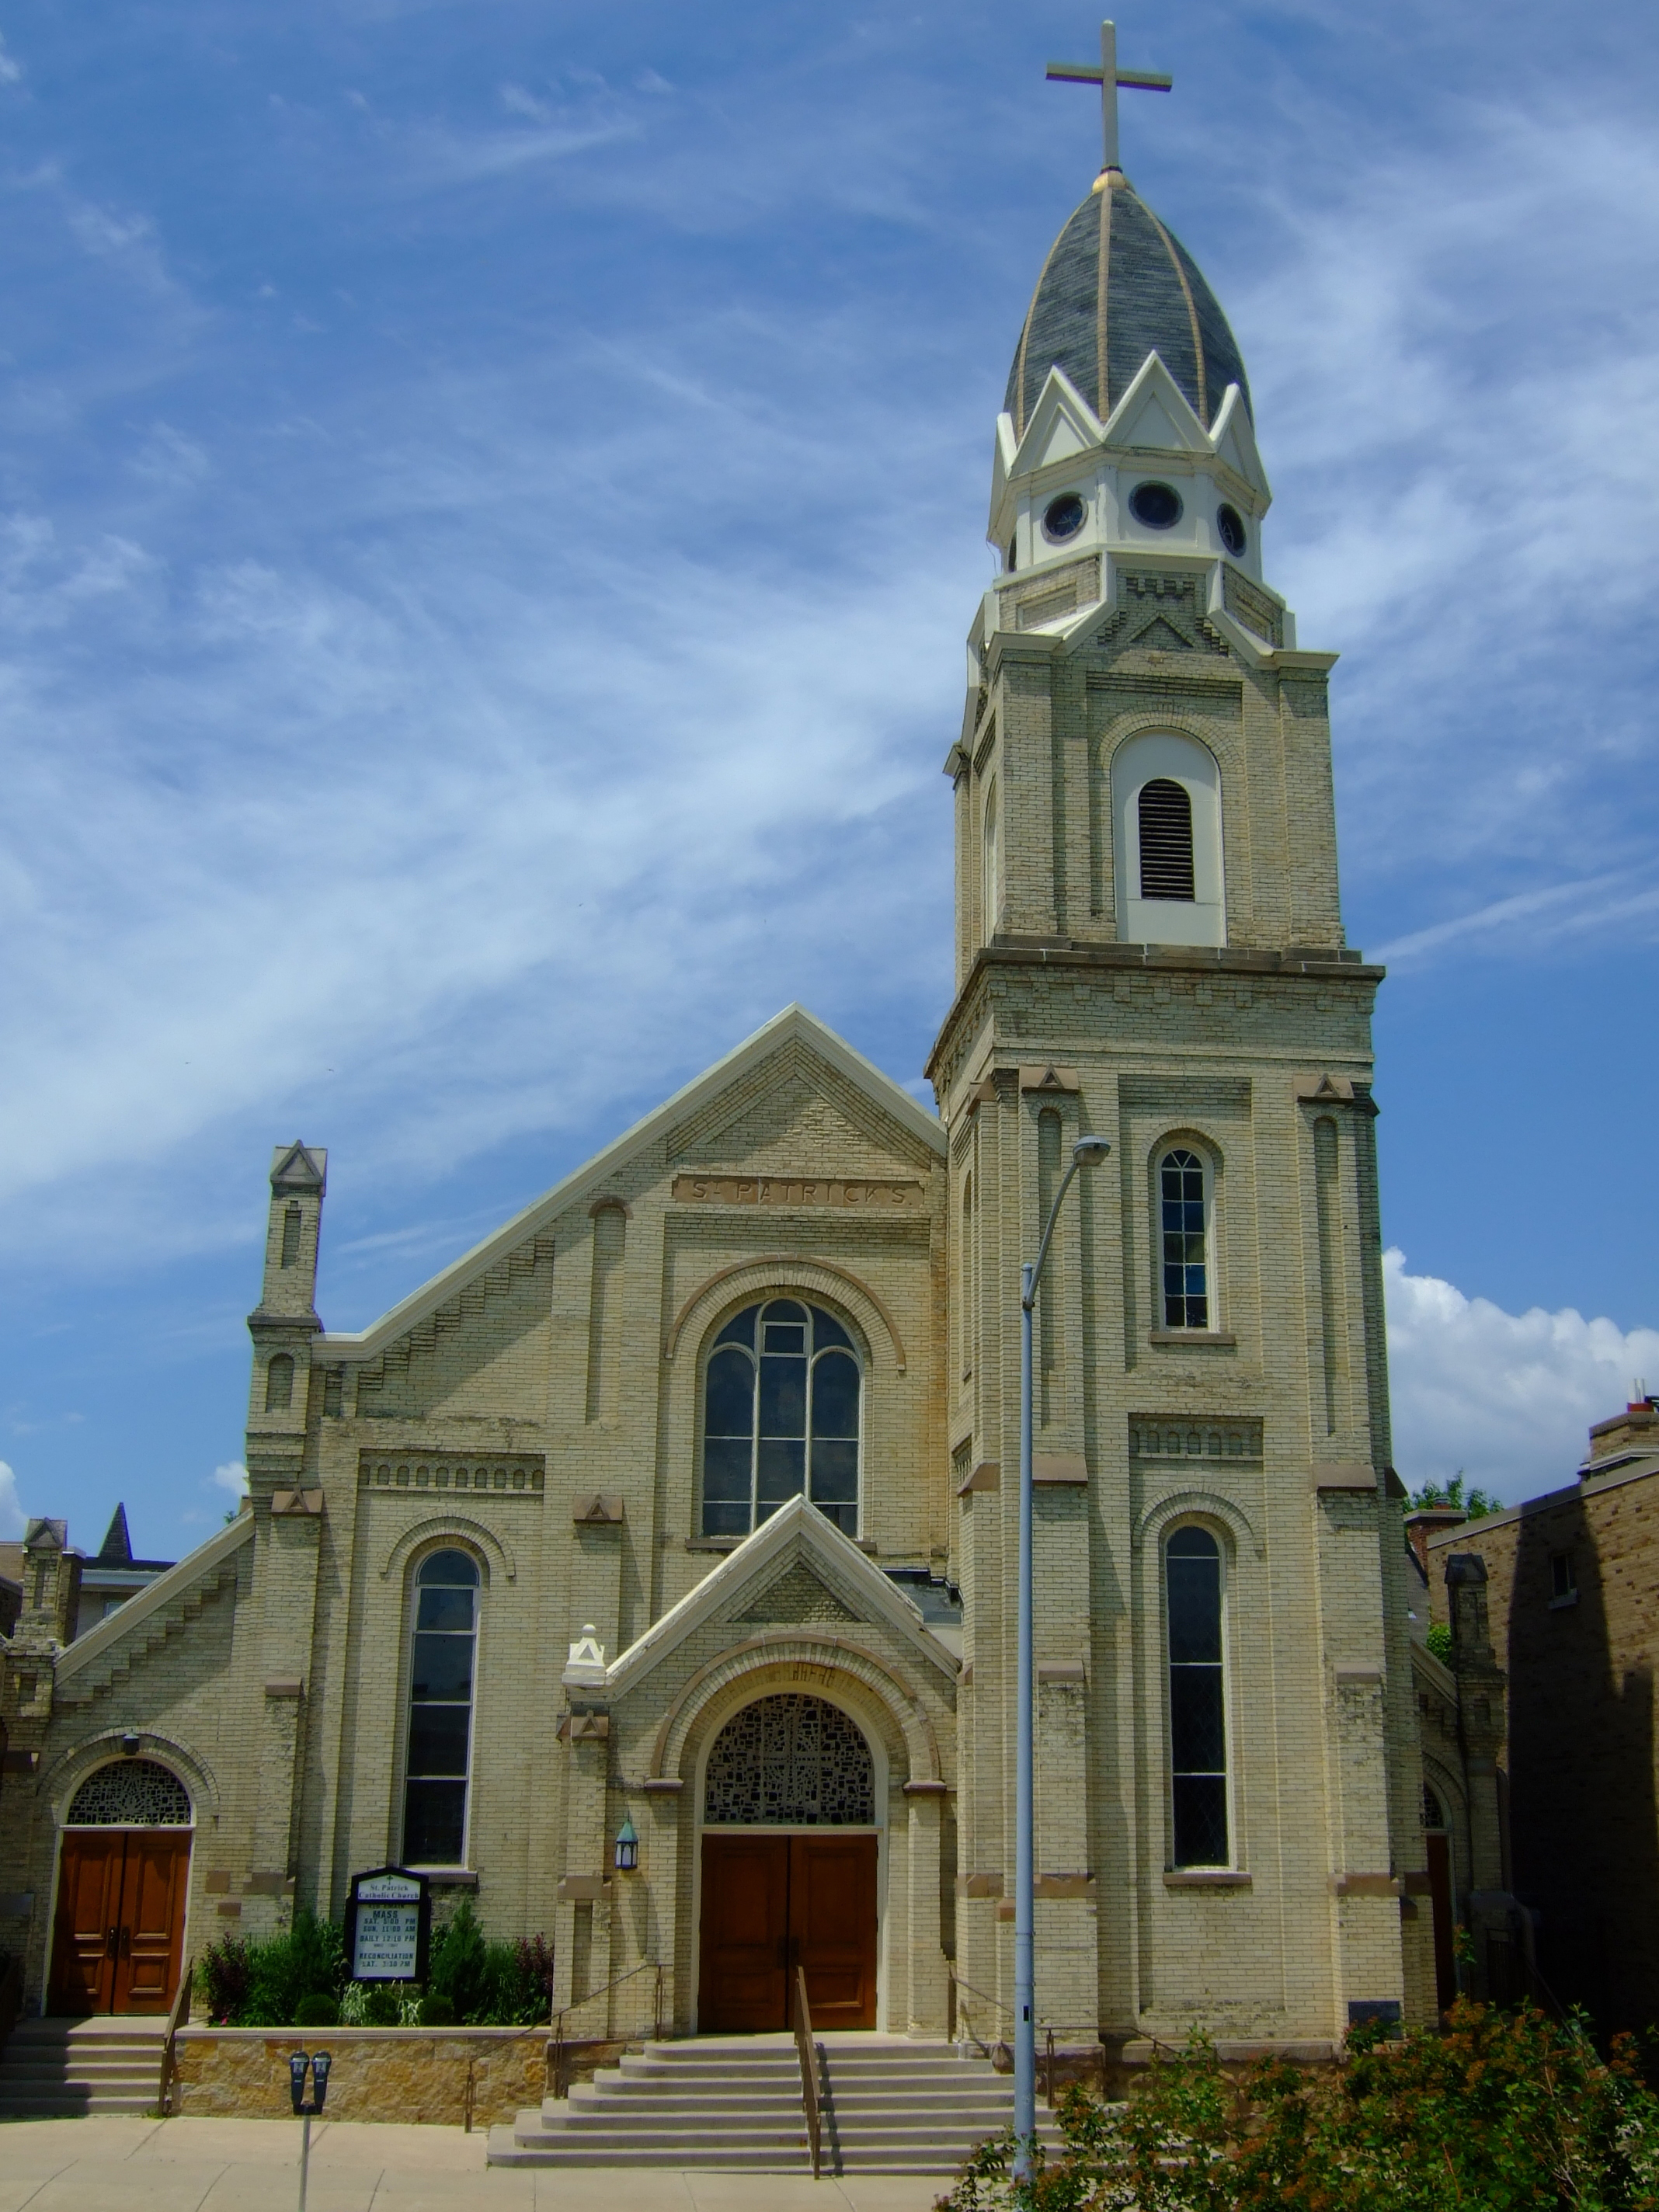 Can a Catholic parish have more than one church within it?